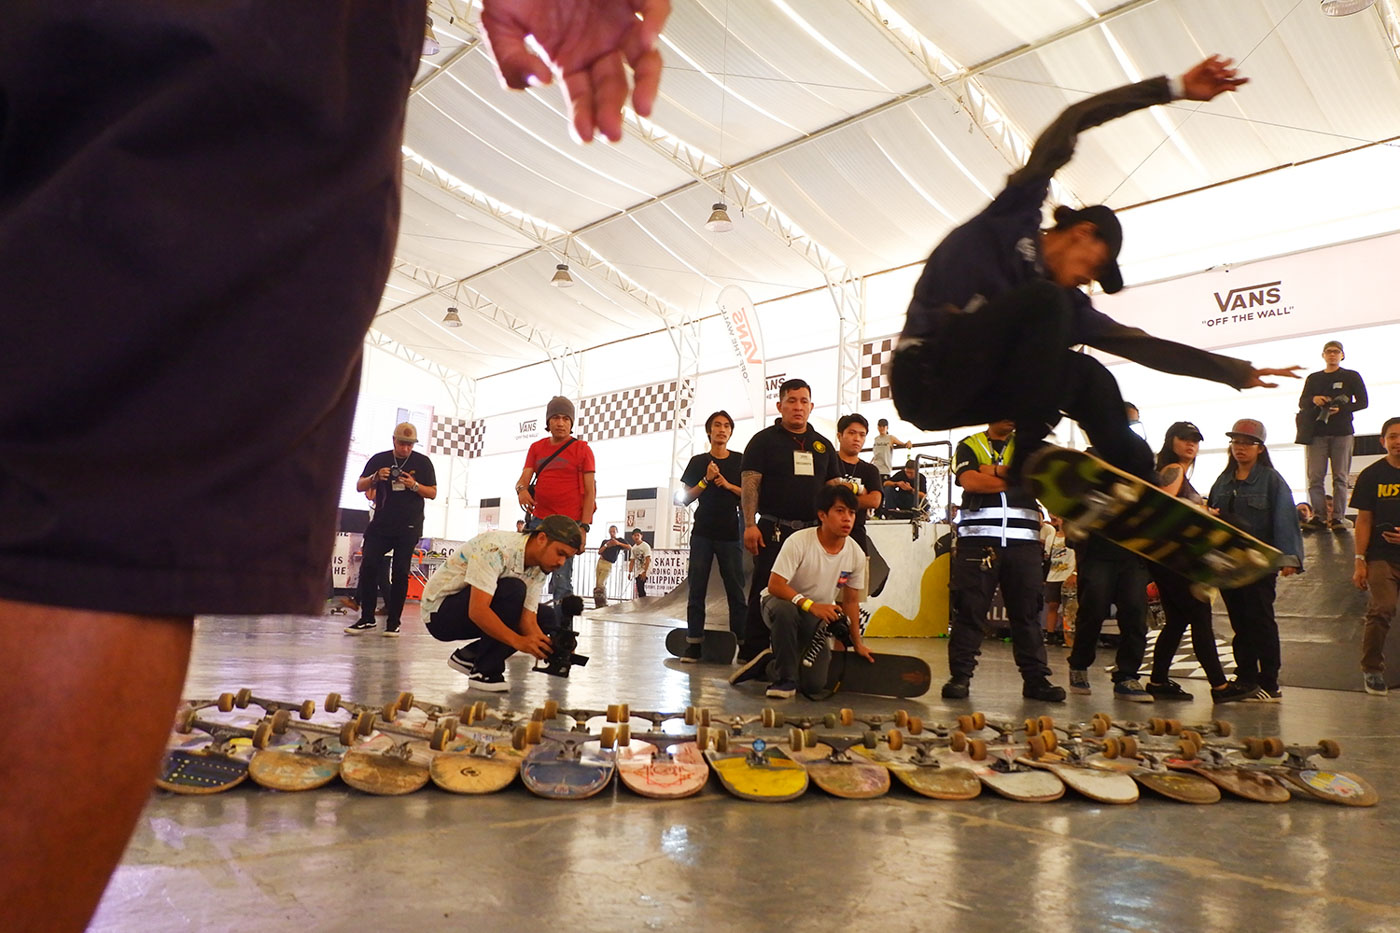 BODY COUNT. A rider attempts to clear a staggering 17 boards for the longest ollie. 